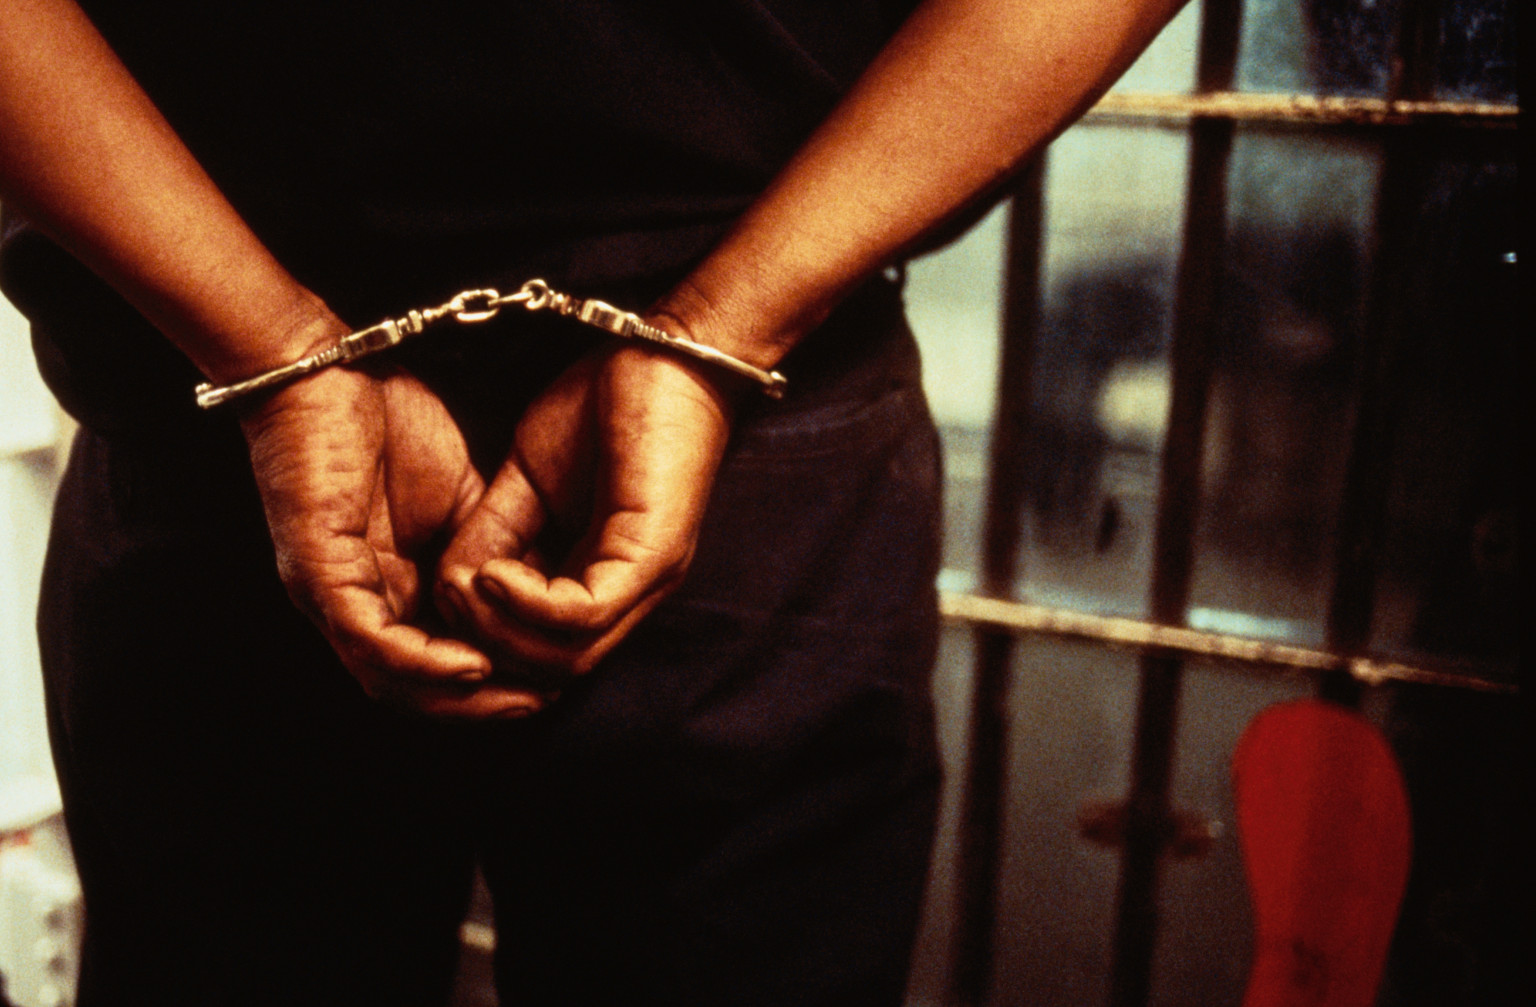 Police officer, six others nabbed for peddling narcotics